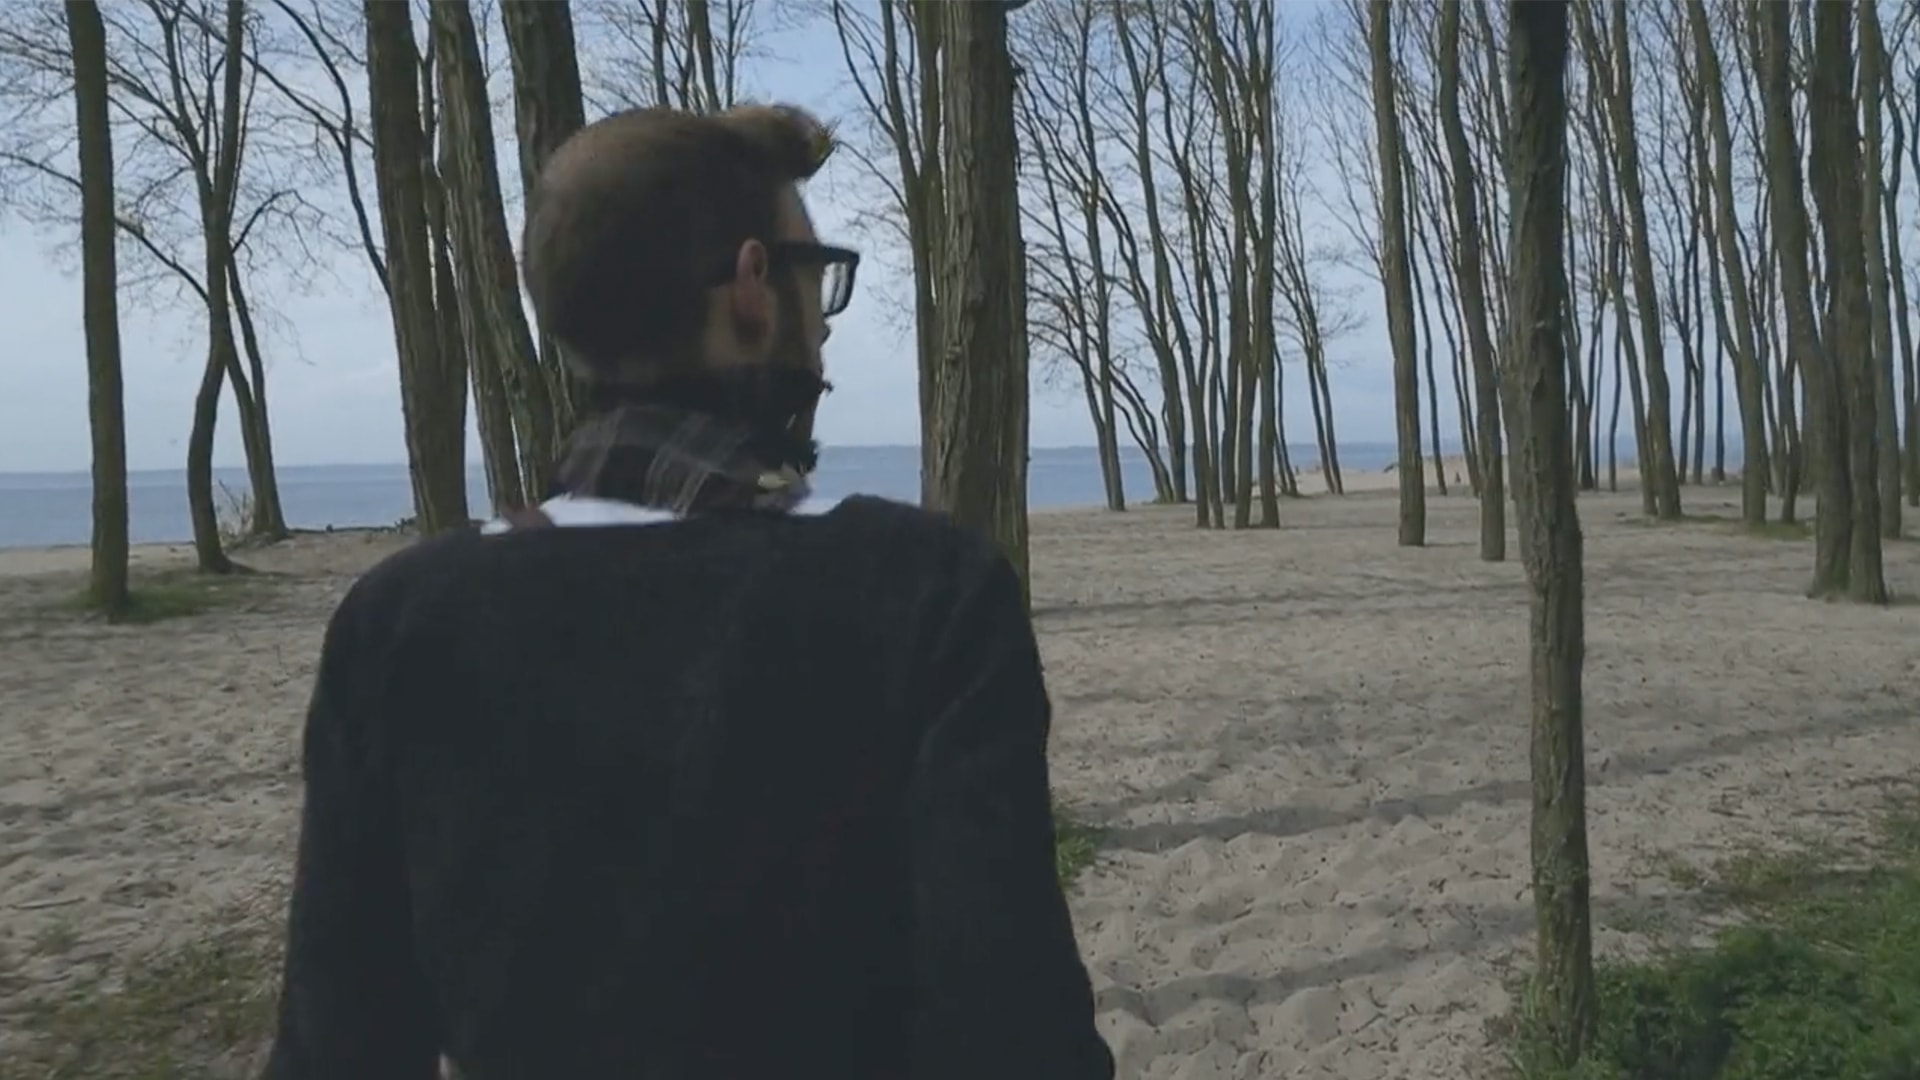 Man with a scarf and sweater is walking through a forest of bear trees near the beach.